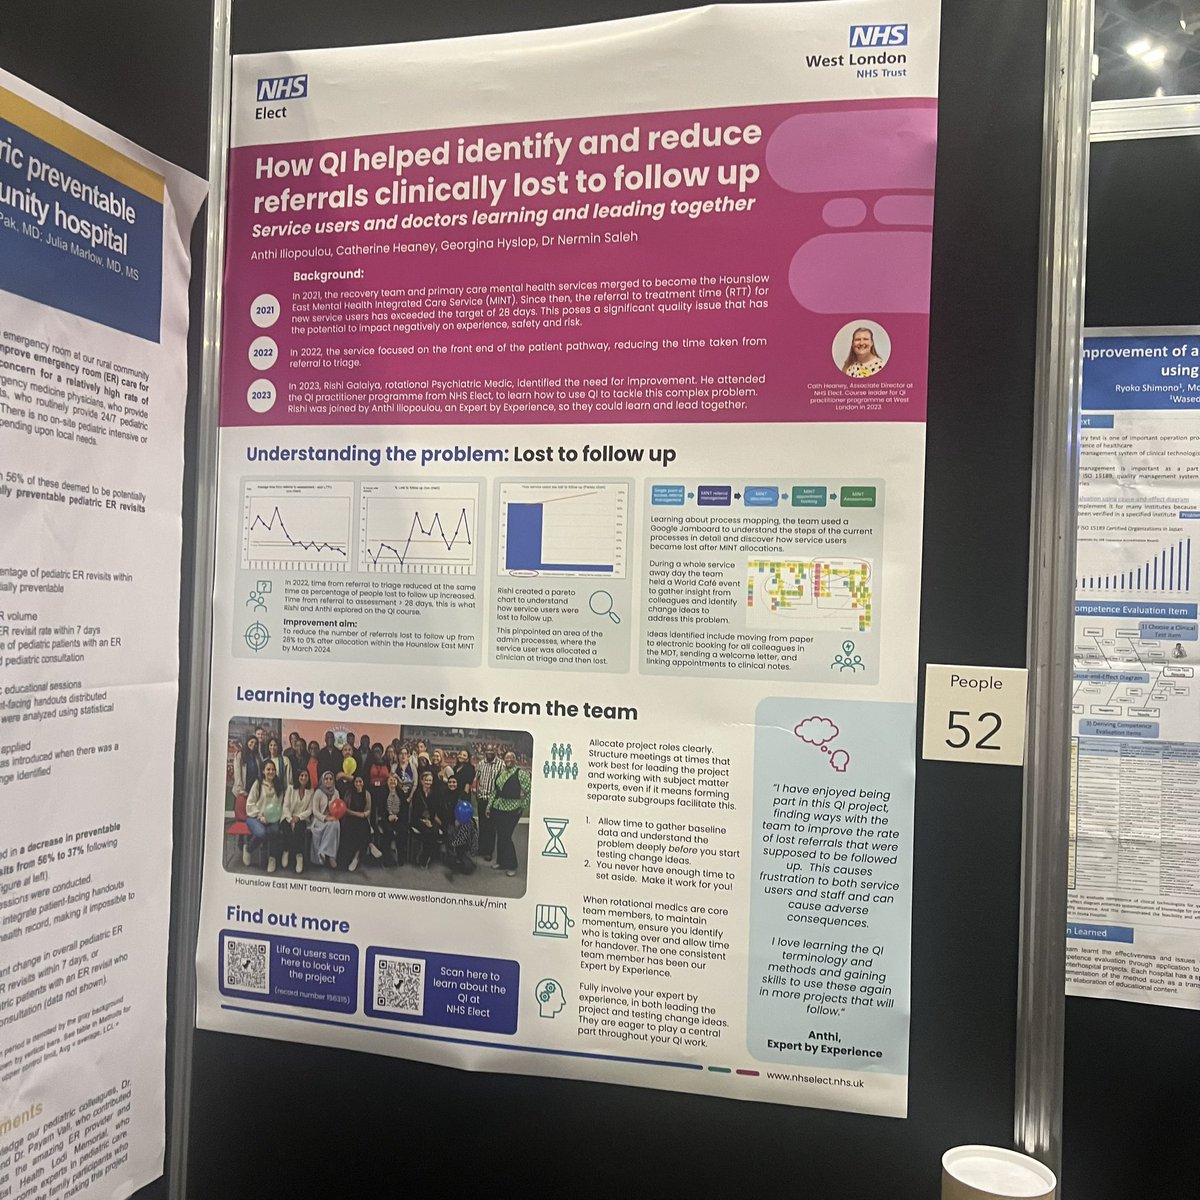 Well done to @westlondonnhs CARMHS Hounslow MINT team for presenting their Qi project on “reducing referrals clinically lost to follow up” at the @QualityForum #quality2024 great work! If at the conference have a look people 51 & say hi to Georgina & us #TeamWestlondonNHS #london